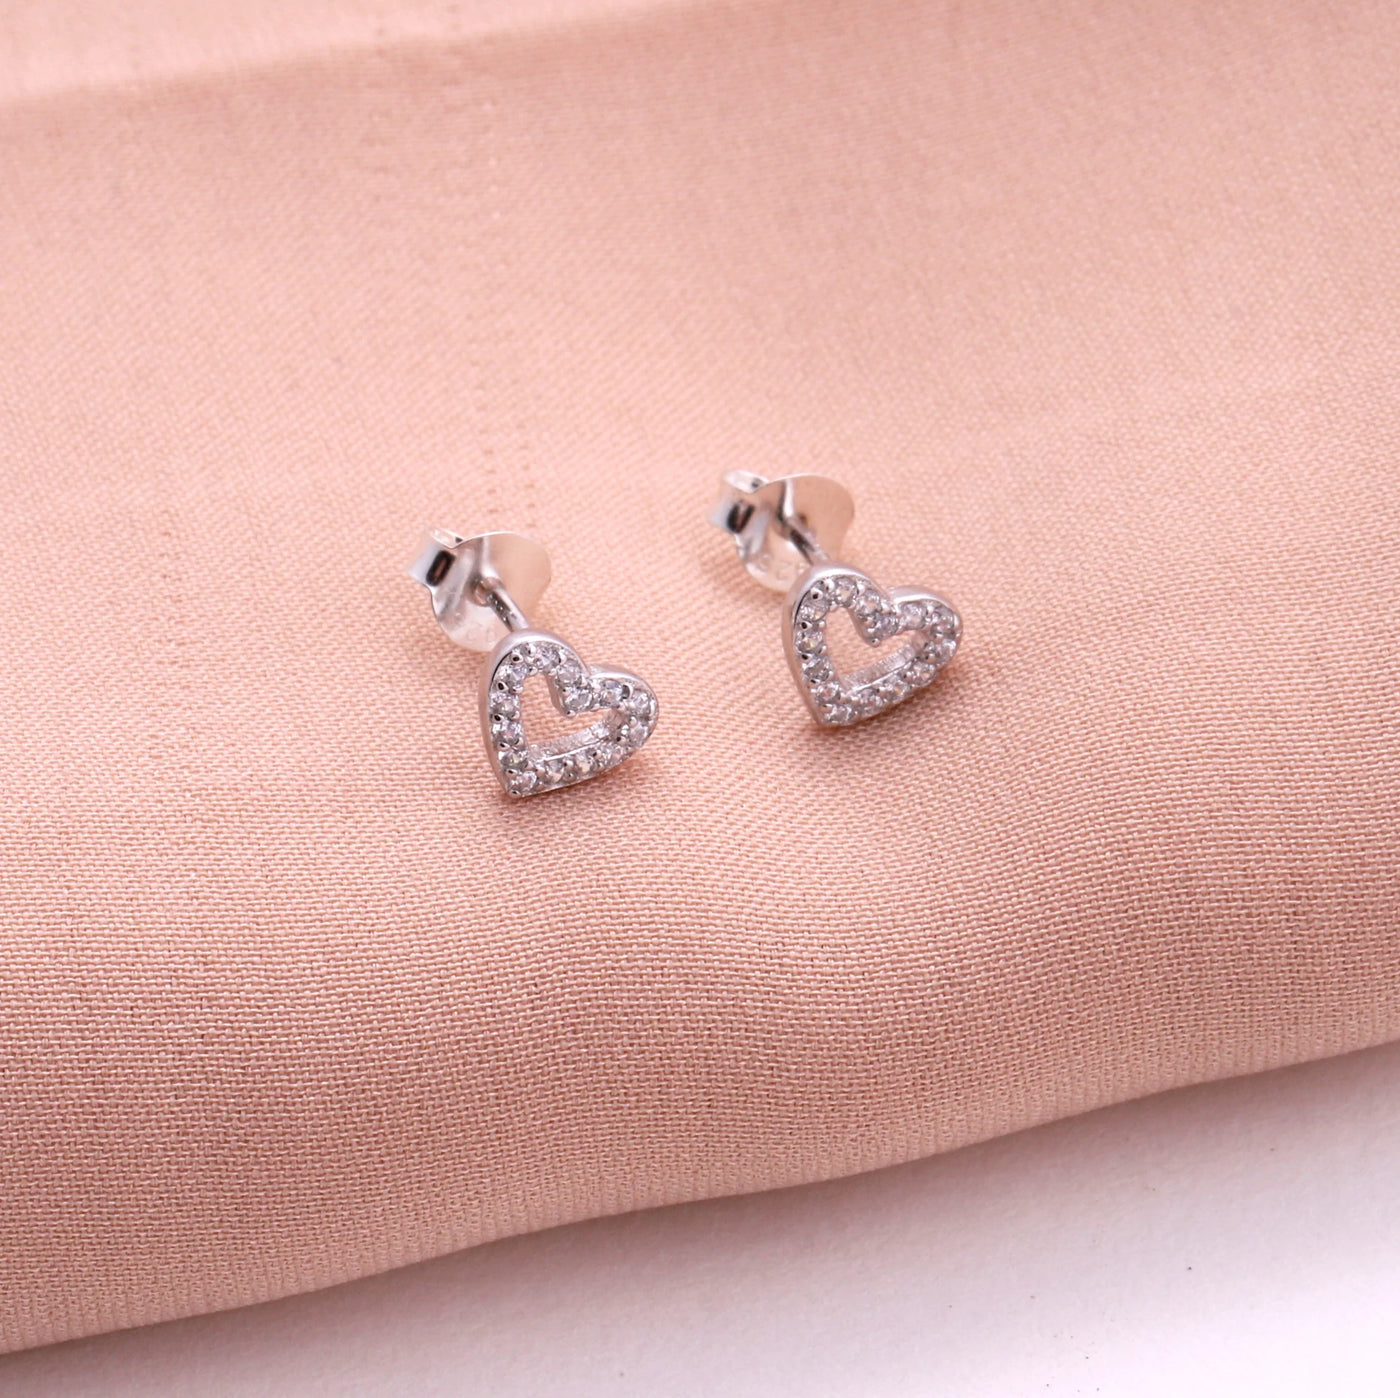 You're 40 - Message in a Bottle - Pave Crystal Heart Stud Earrings - Sterling Silver